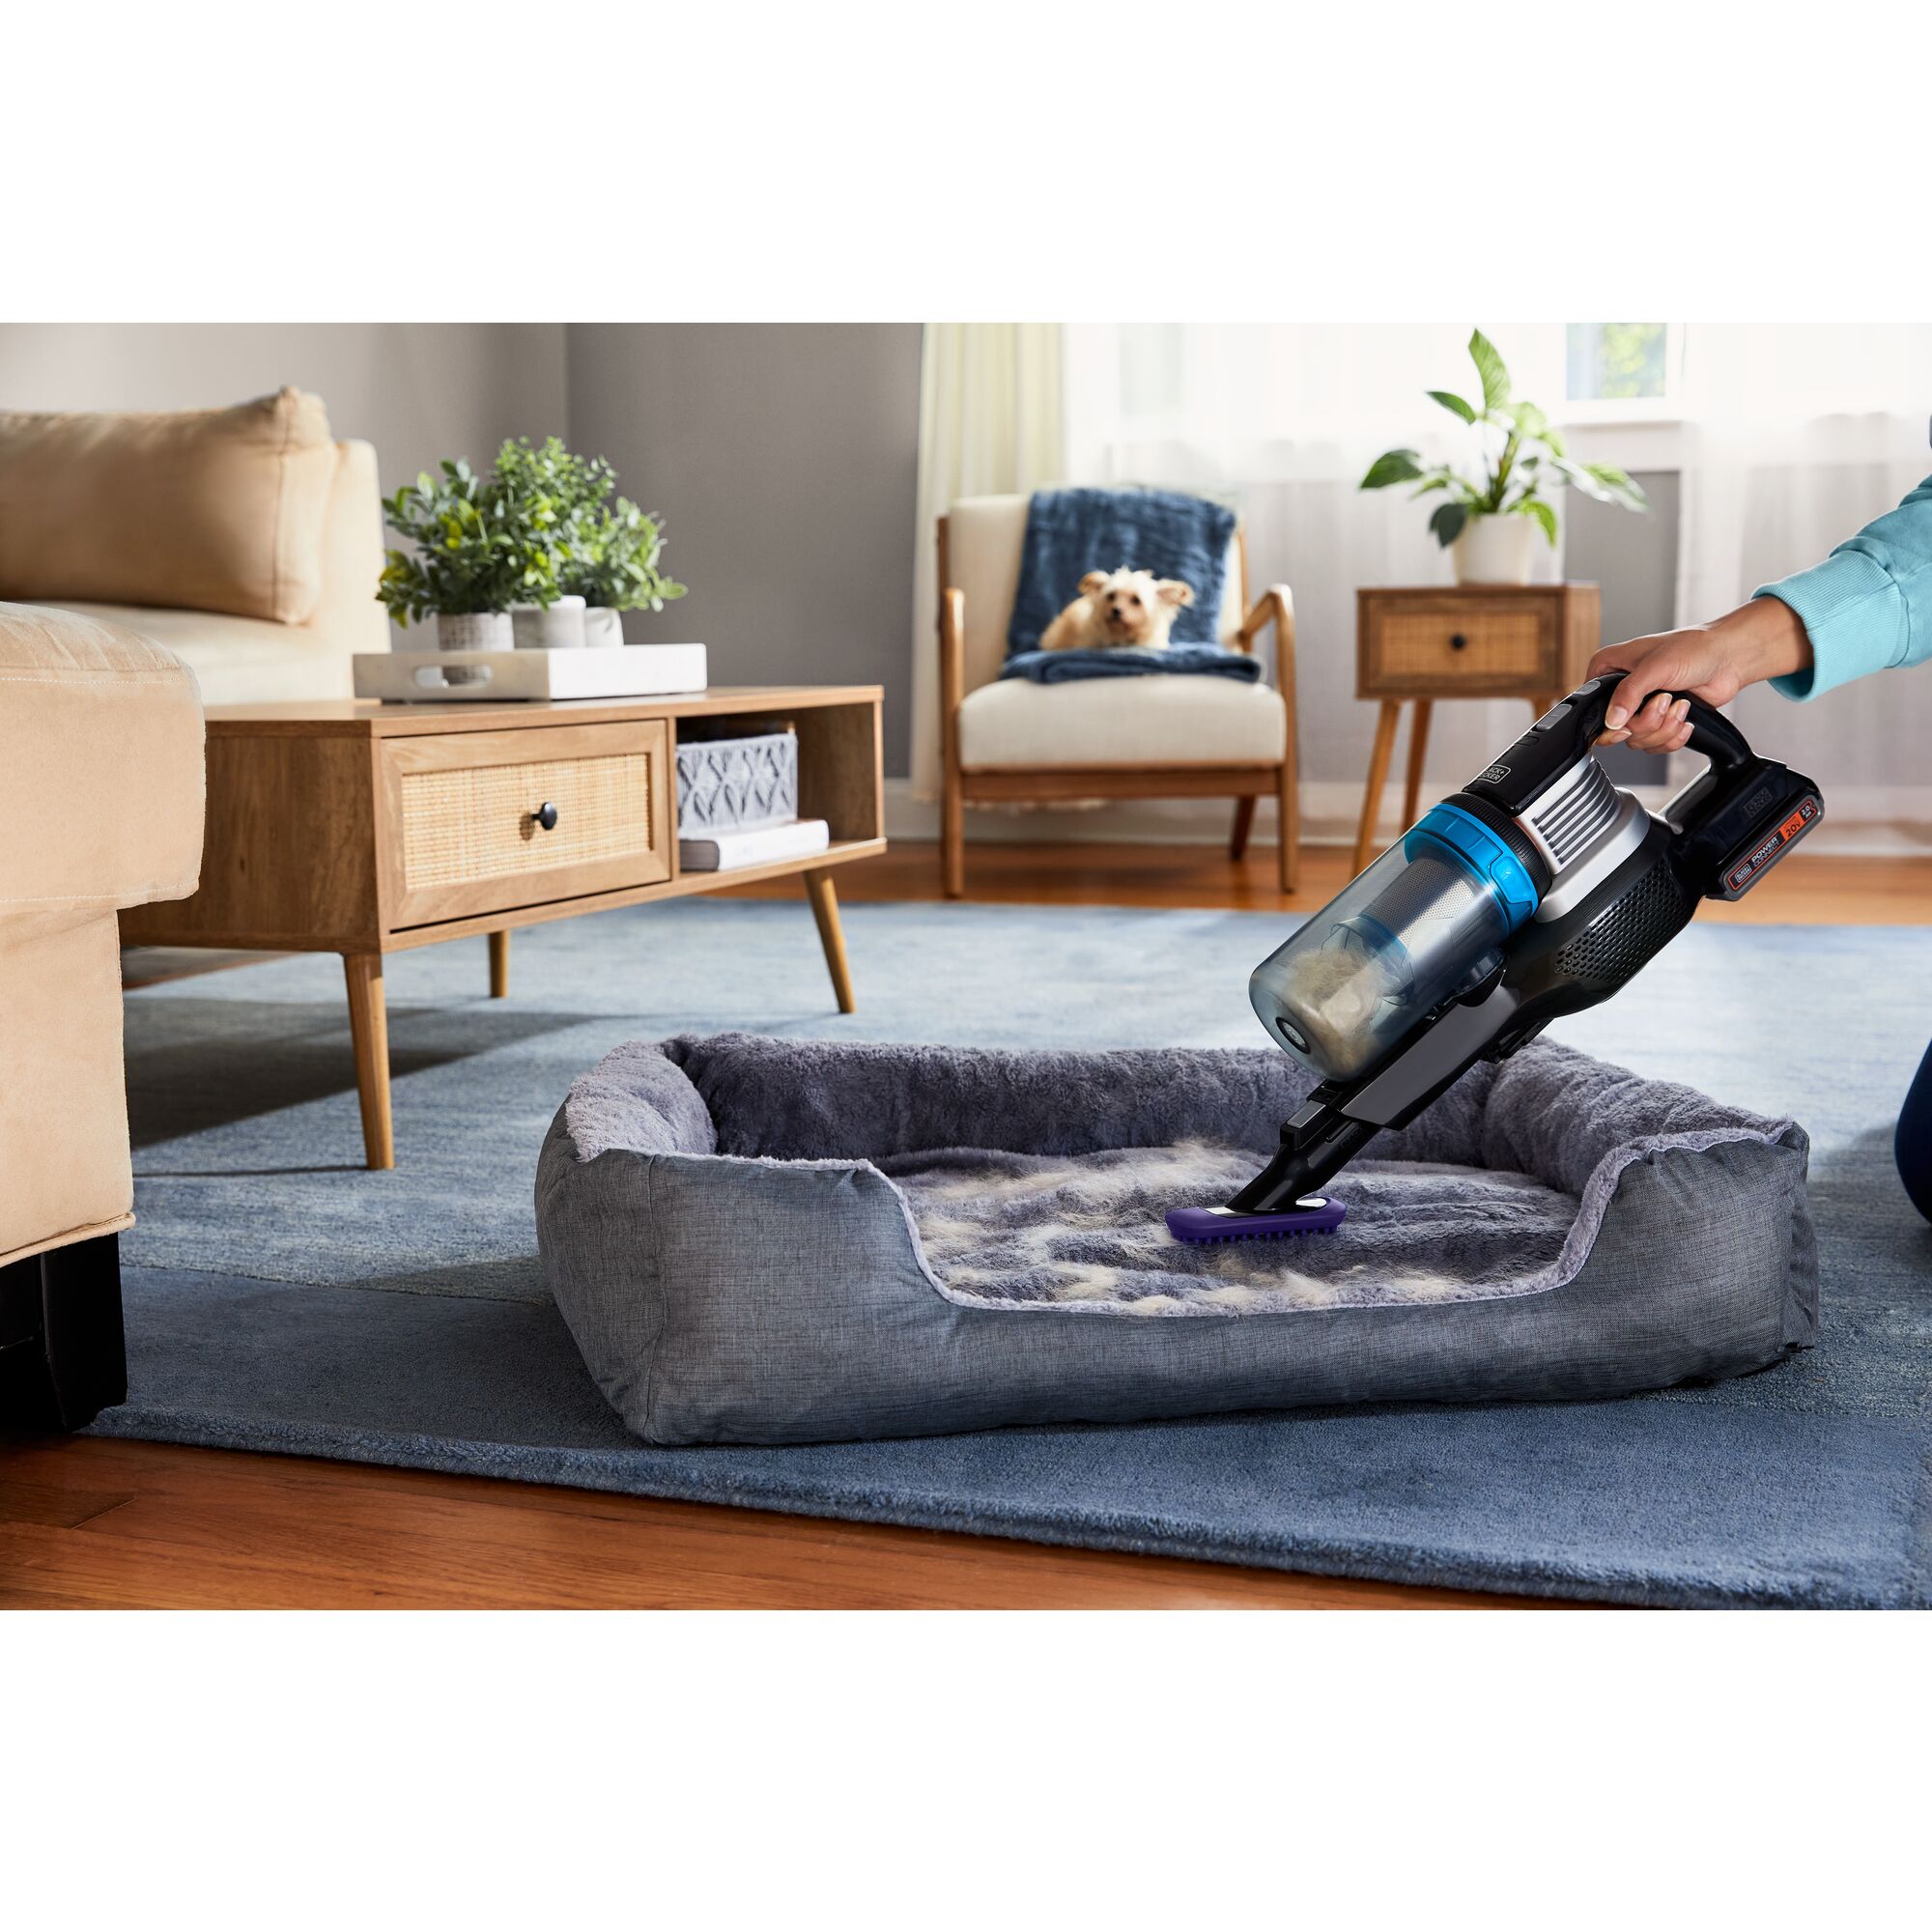 Woman vacuuming hair out of a dog bed with the pet attachment for the POWERSERIES Extreme MAX stick vac